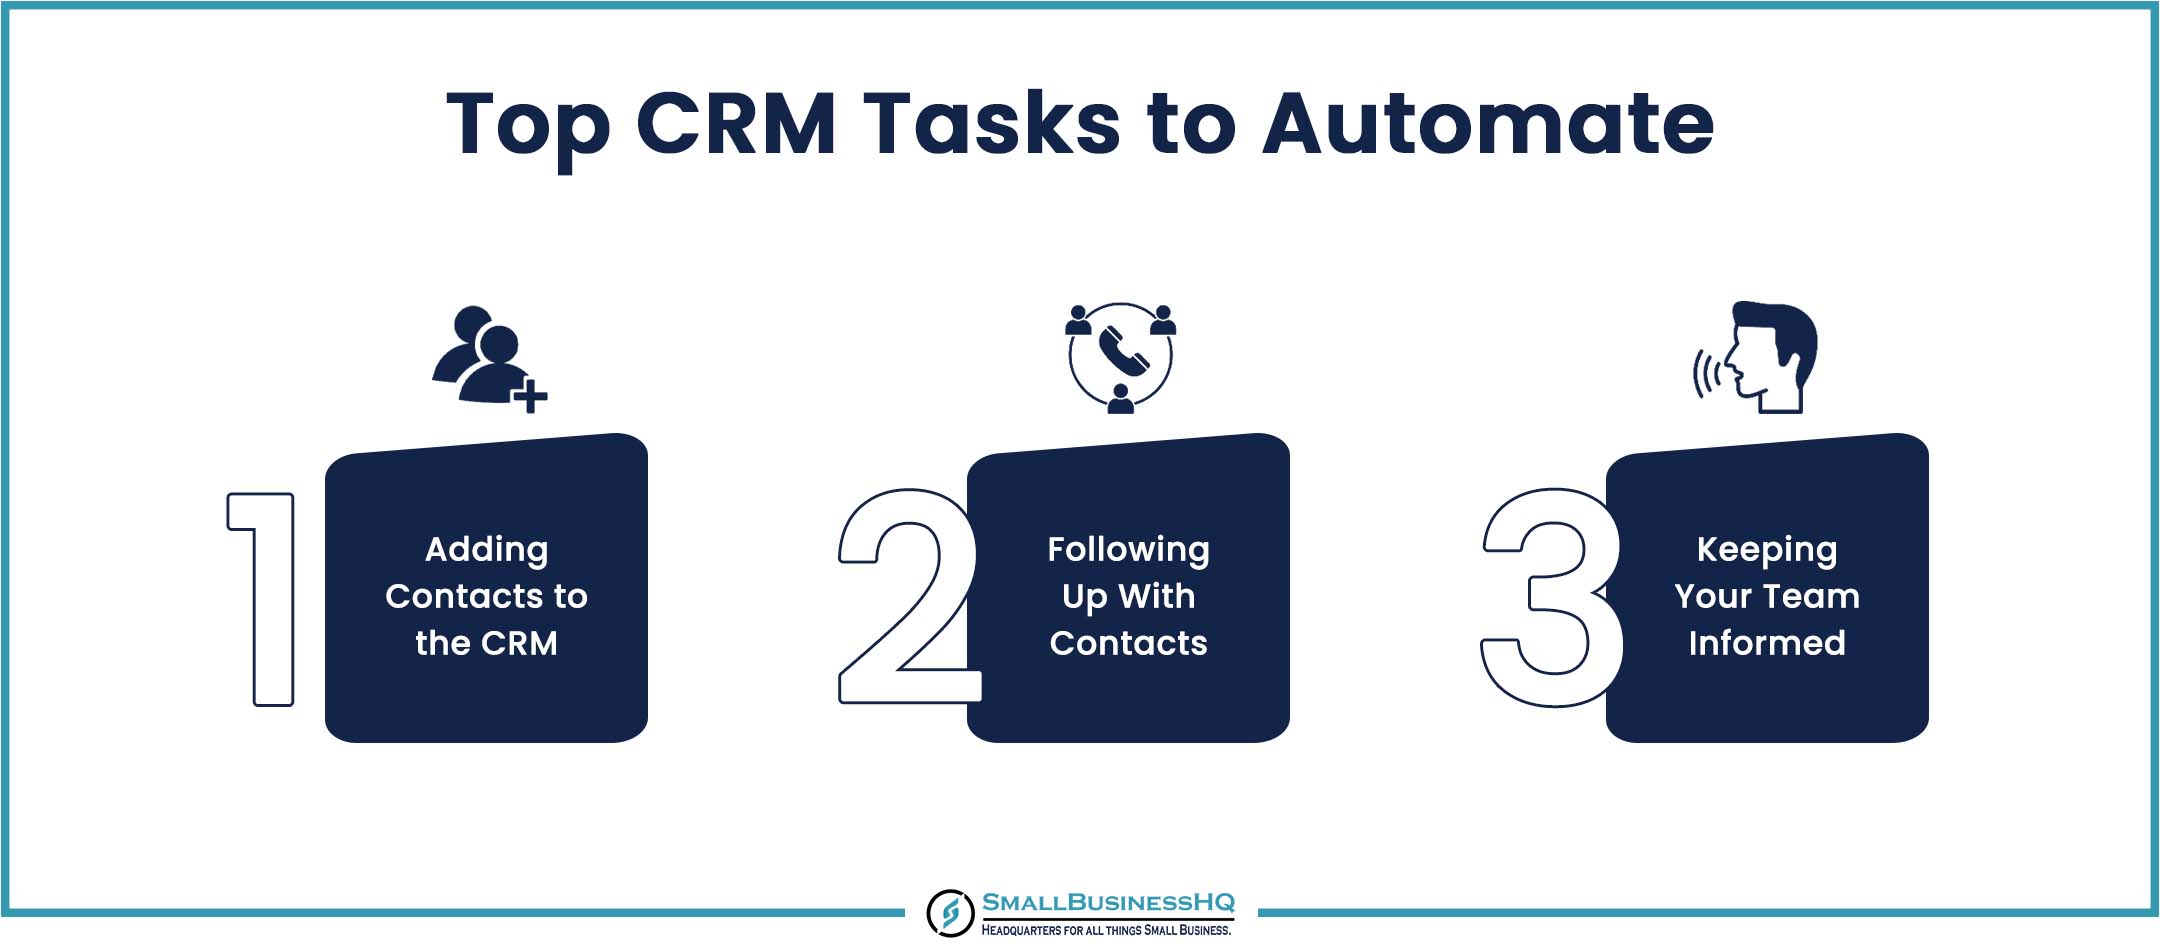 Top CRM Tasks to Automate